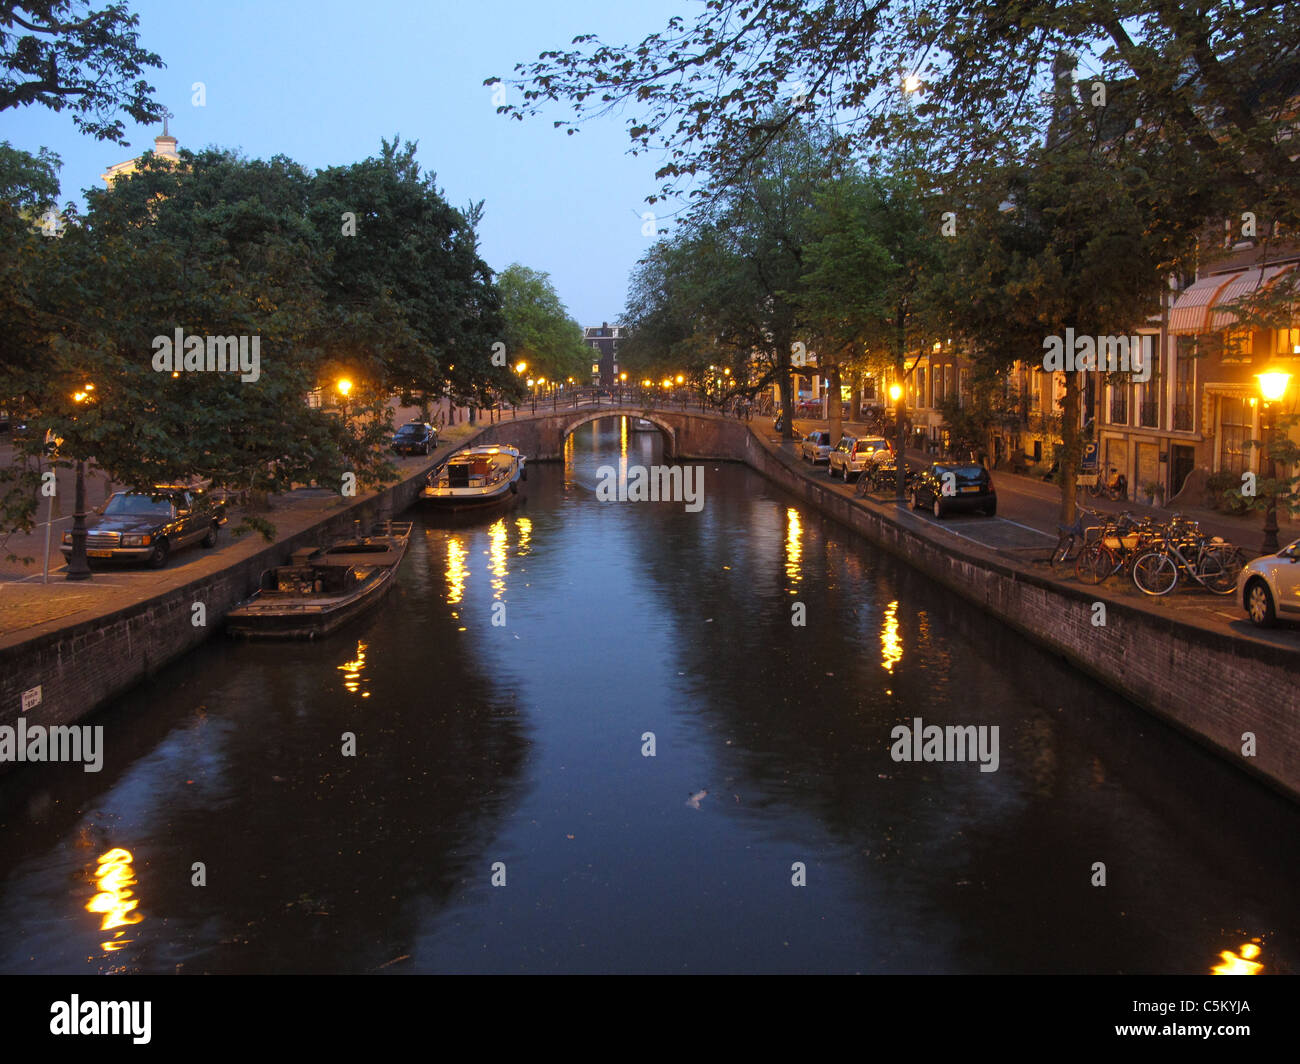 Gracht in Amsterdam at night Stock Photo